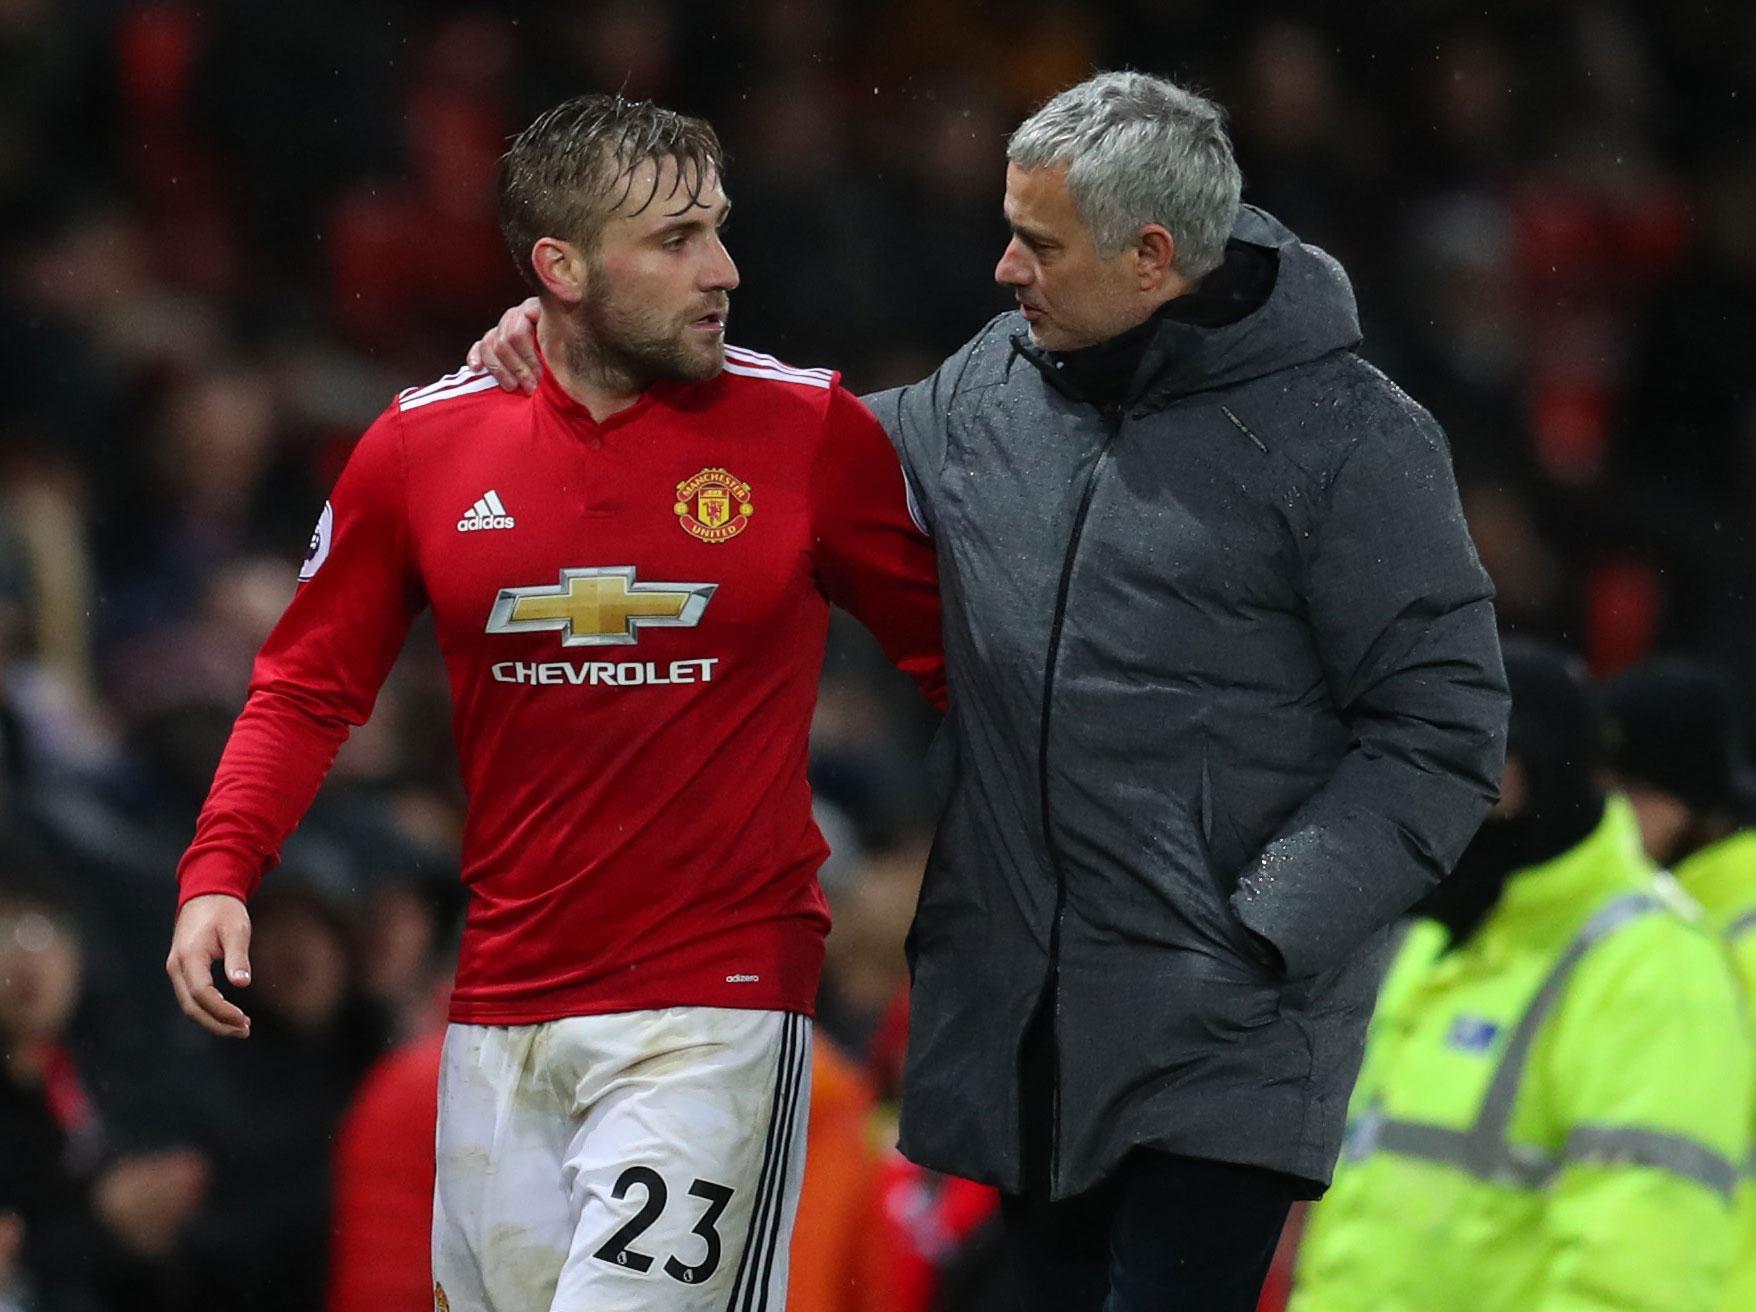 Luke Shaw's application has persuaded Jose Mourinho to change his transfer plans